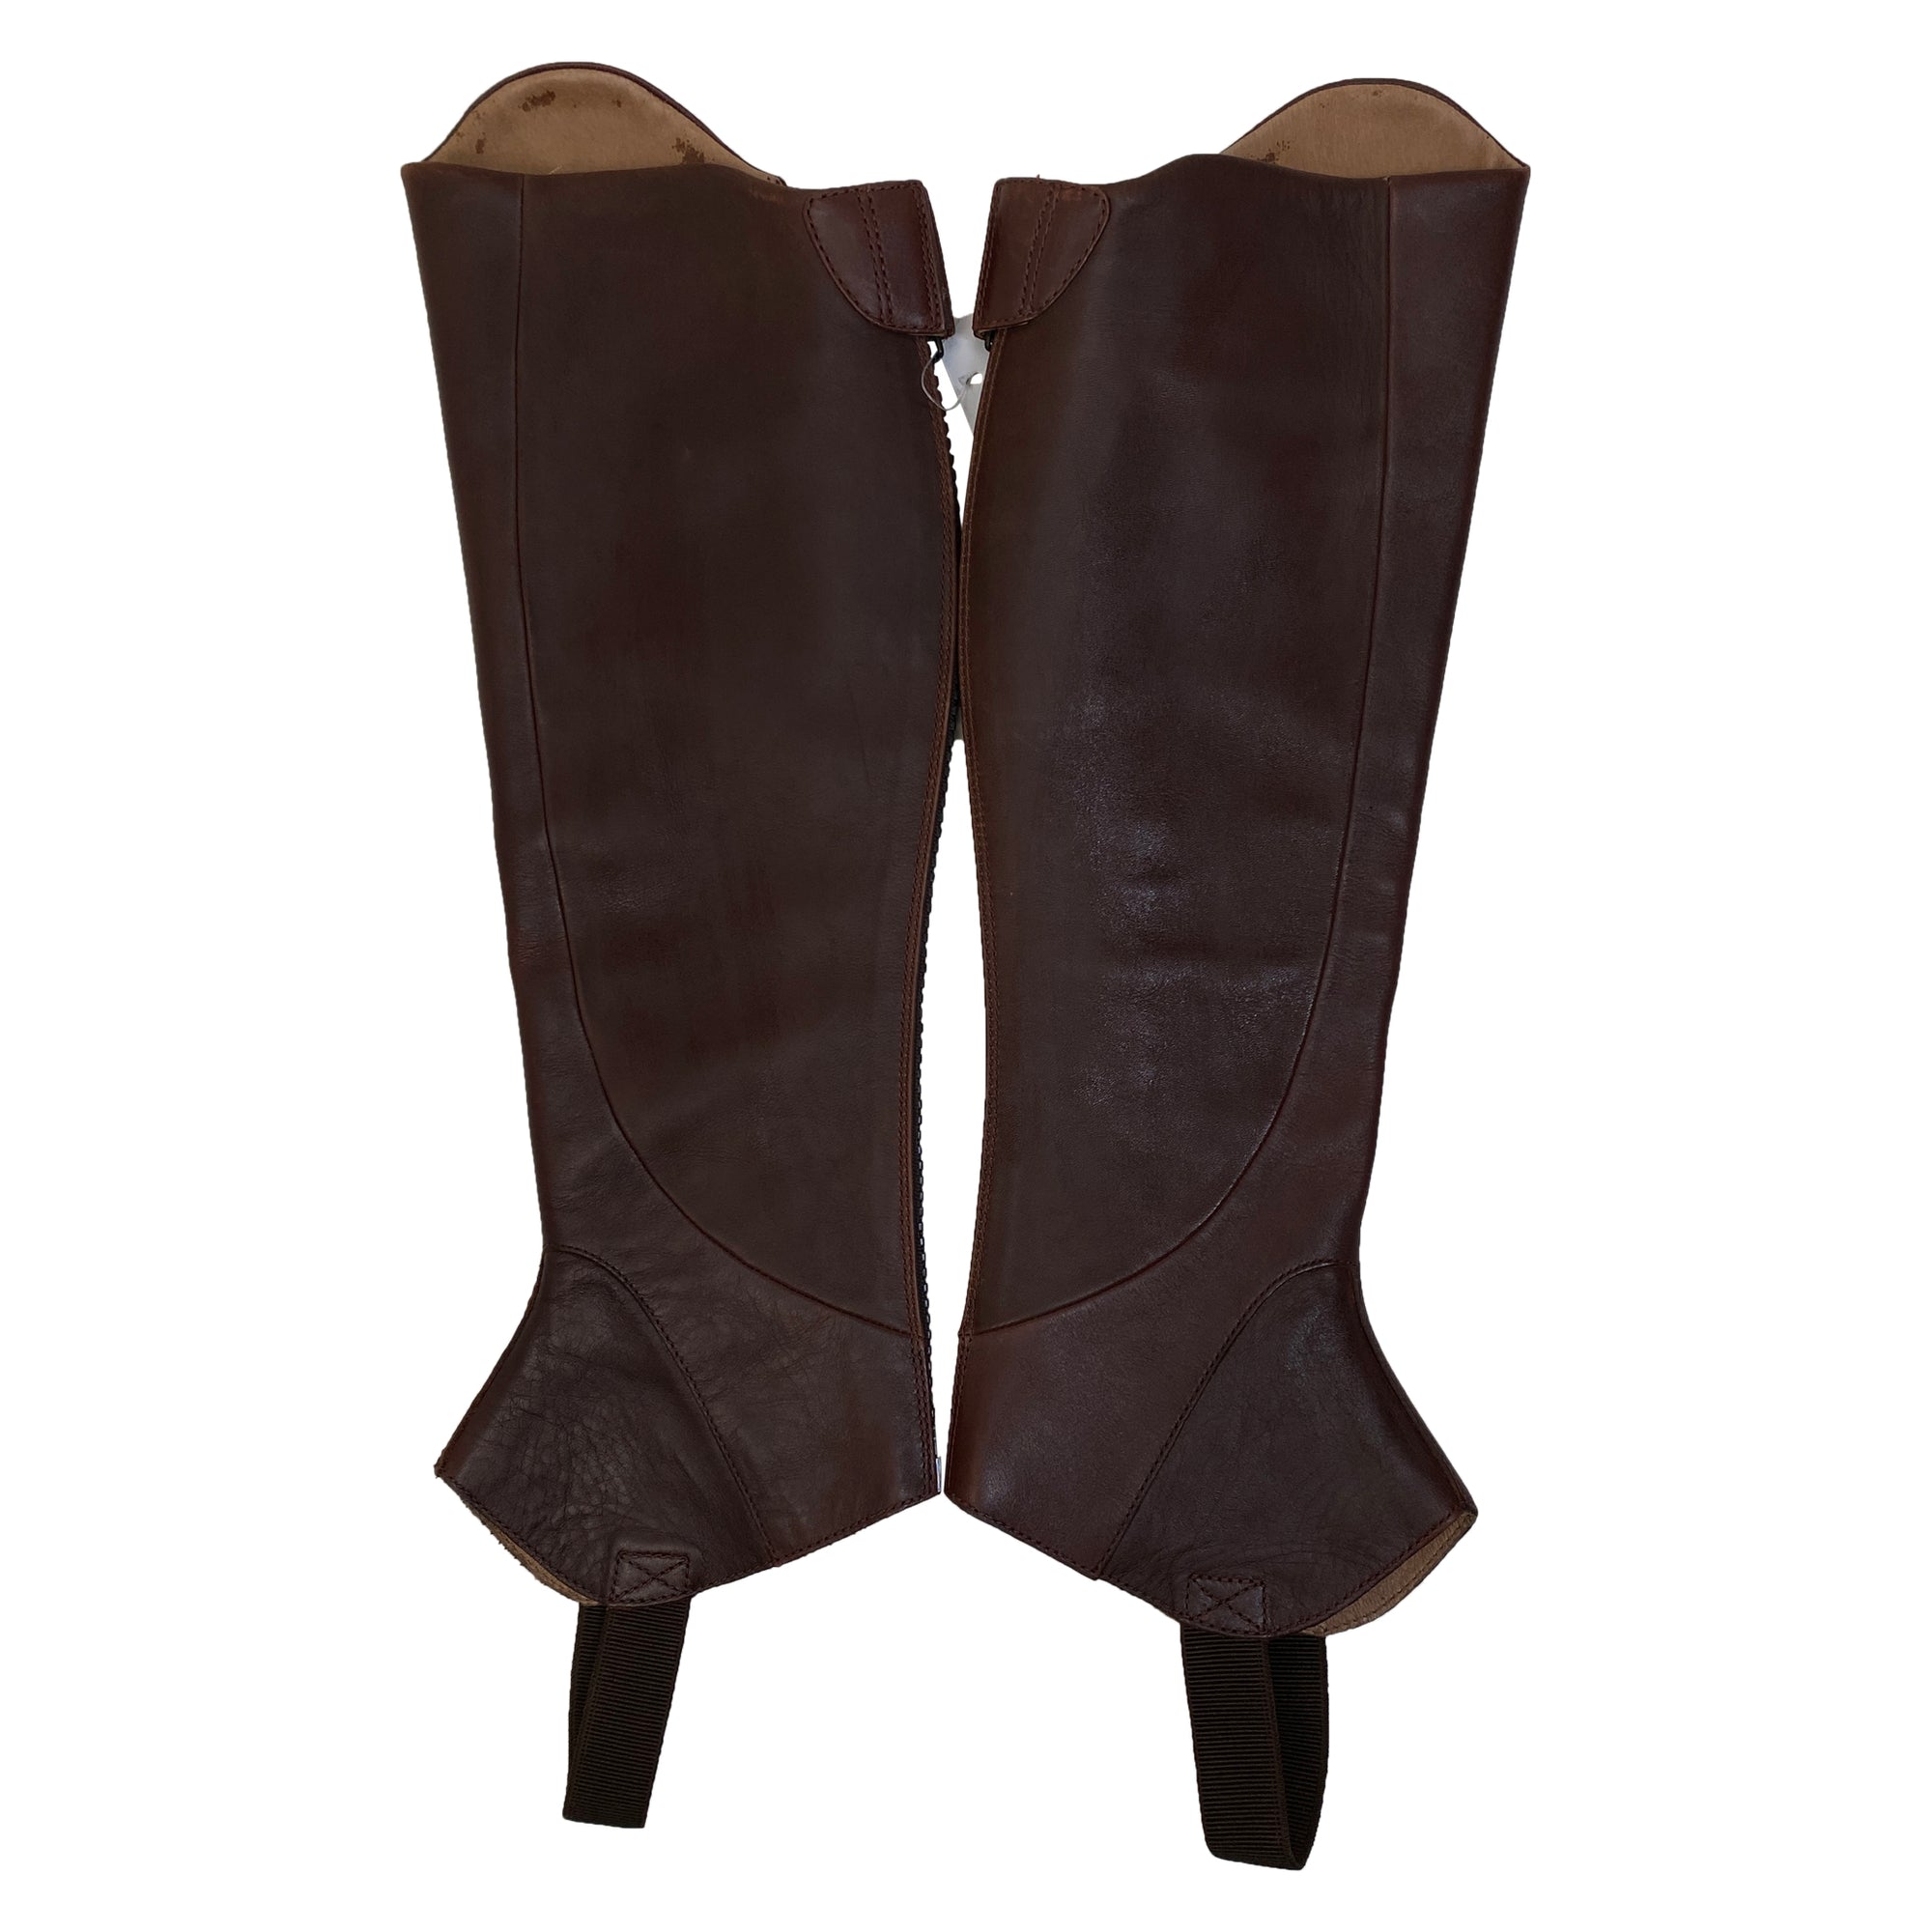 Ariat 'Kendron' Half Chaps in Mohagany